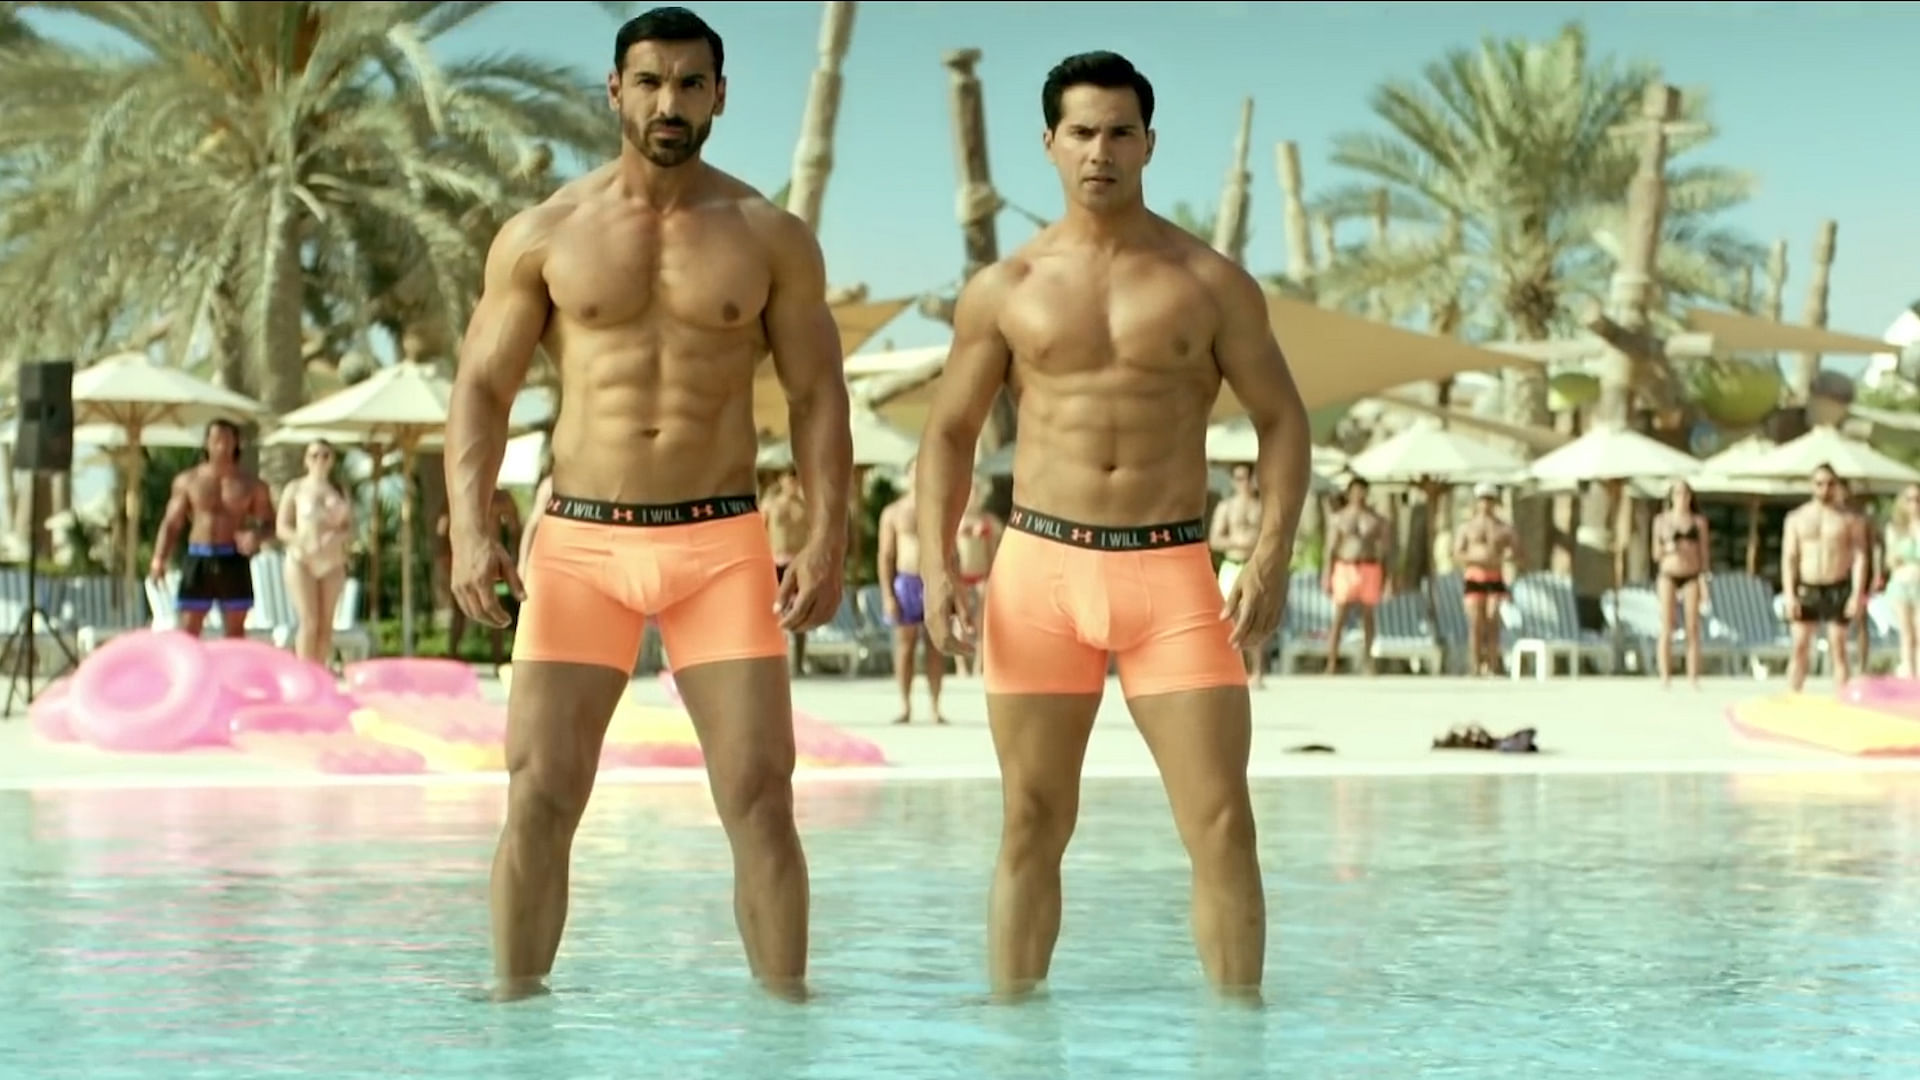 

Dishoom is everything you expect from a typical Bollywood masala entertainer. (Photo: YouTube screengrab)